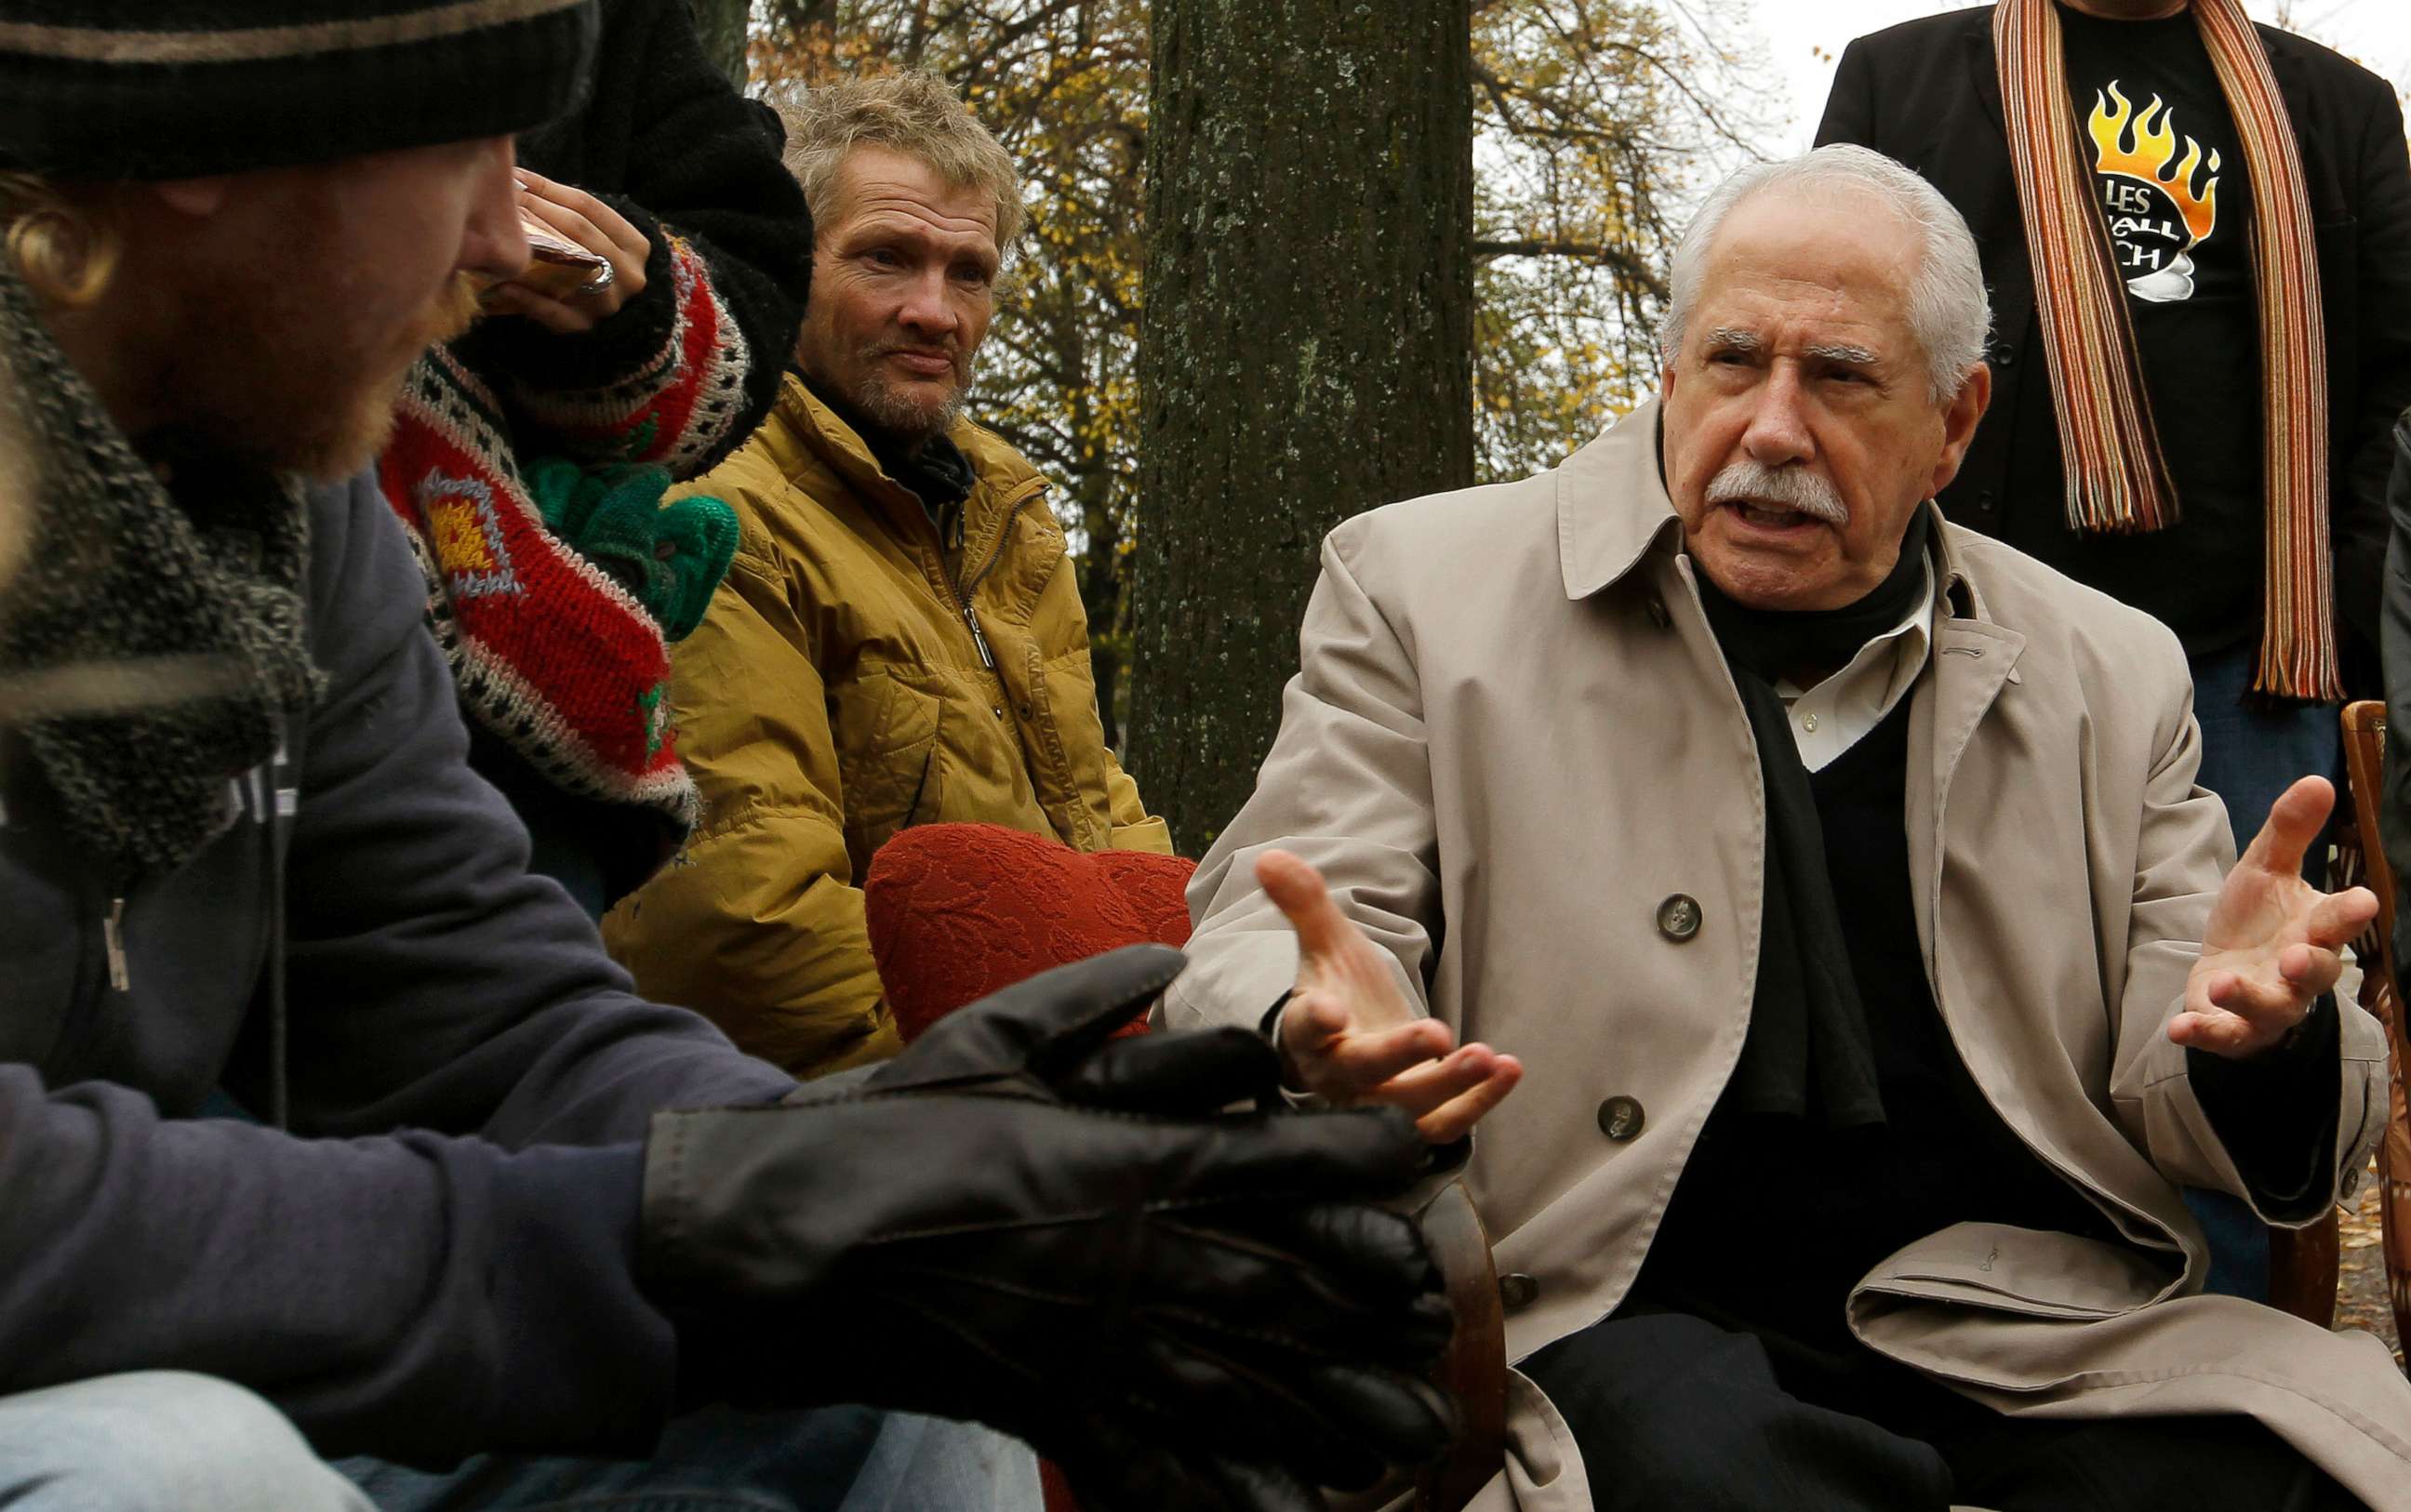 PHOTO: Former U.S. senator Mike Gravel talks to demonstrators at their camp at the Lindenplatz square in Zurich, Oct. 31, 2011.